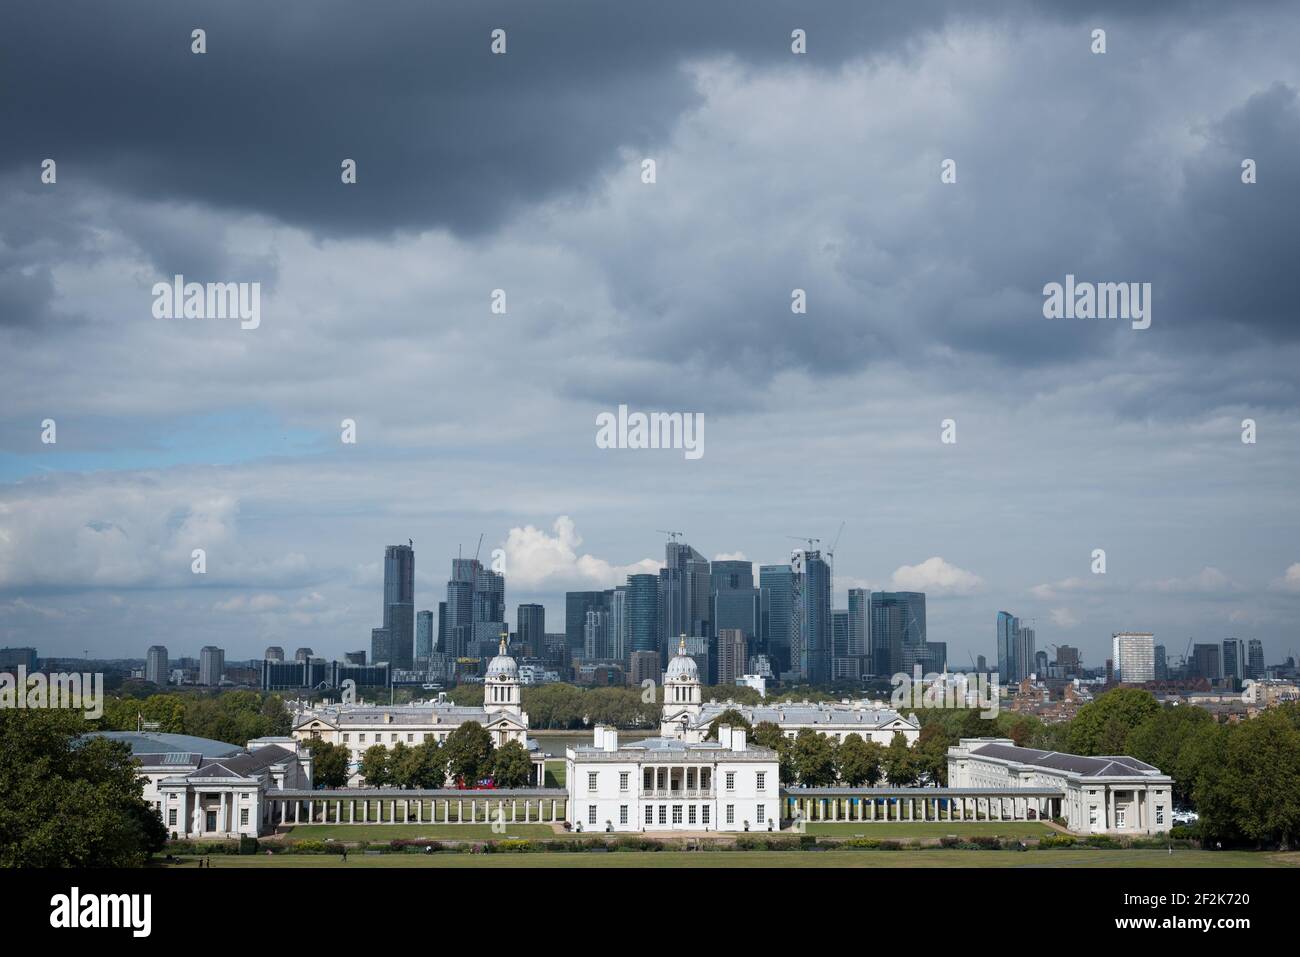 Queen's House, Greenwich, and office blocks in Canary Wharf, London. Stock Photo